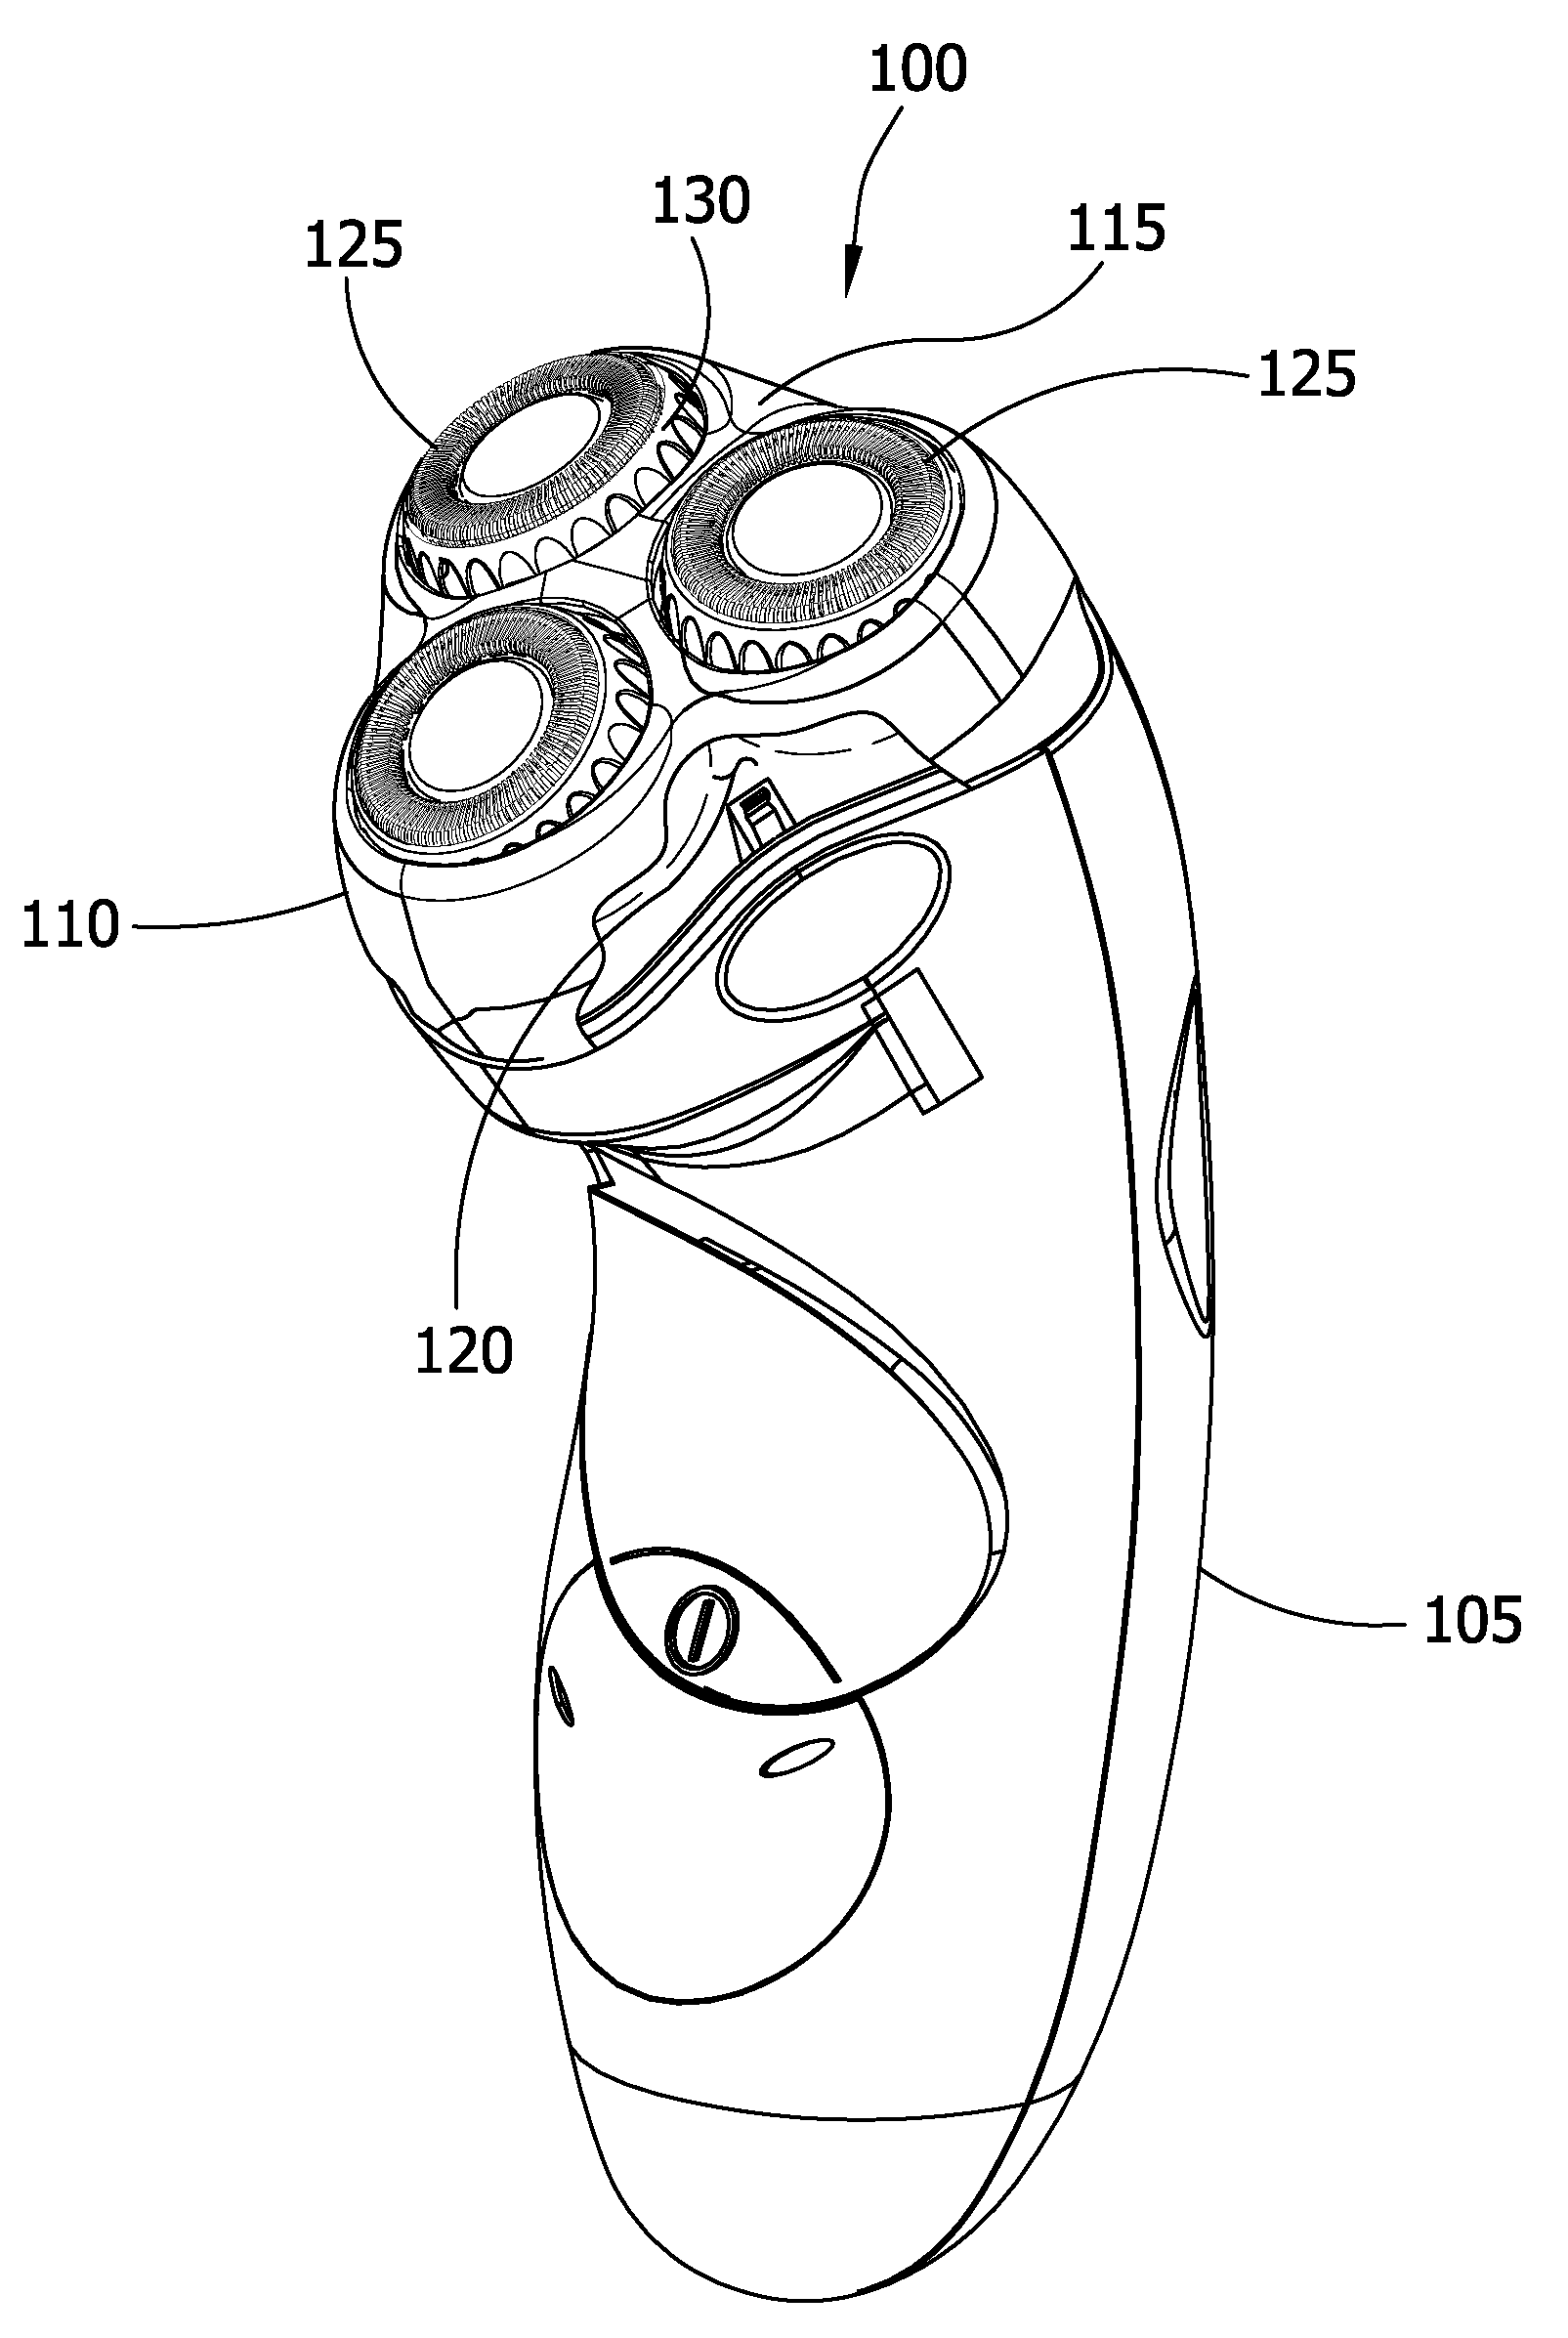 Personal grooming device having a tarnish resistant, hypoallergenic and/or antimicrobial silver alloy coating thereon